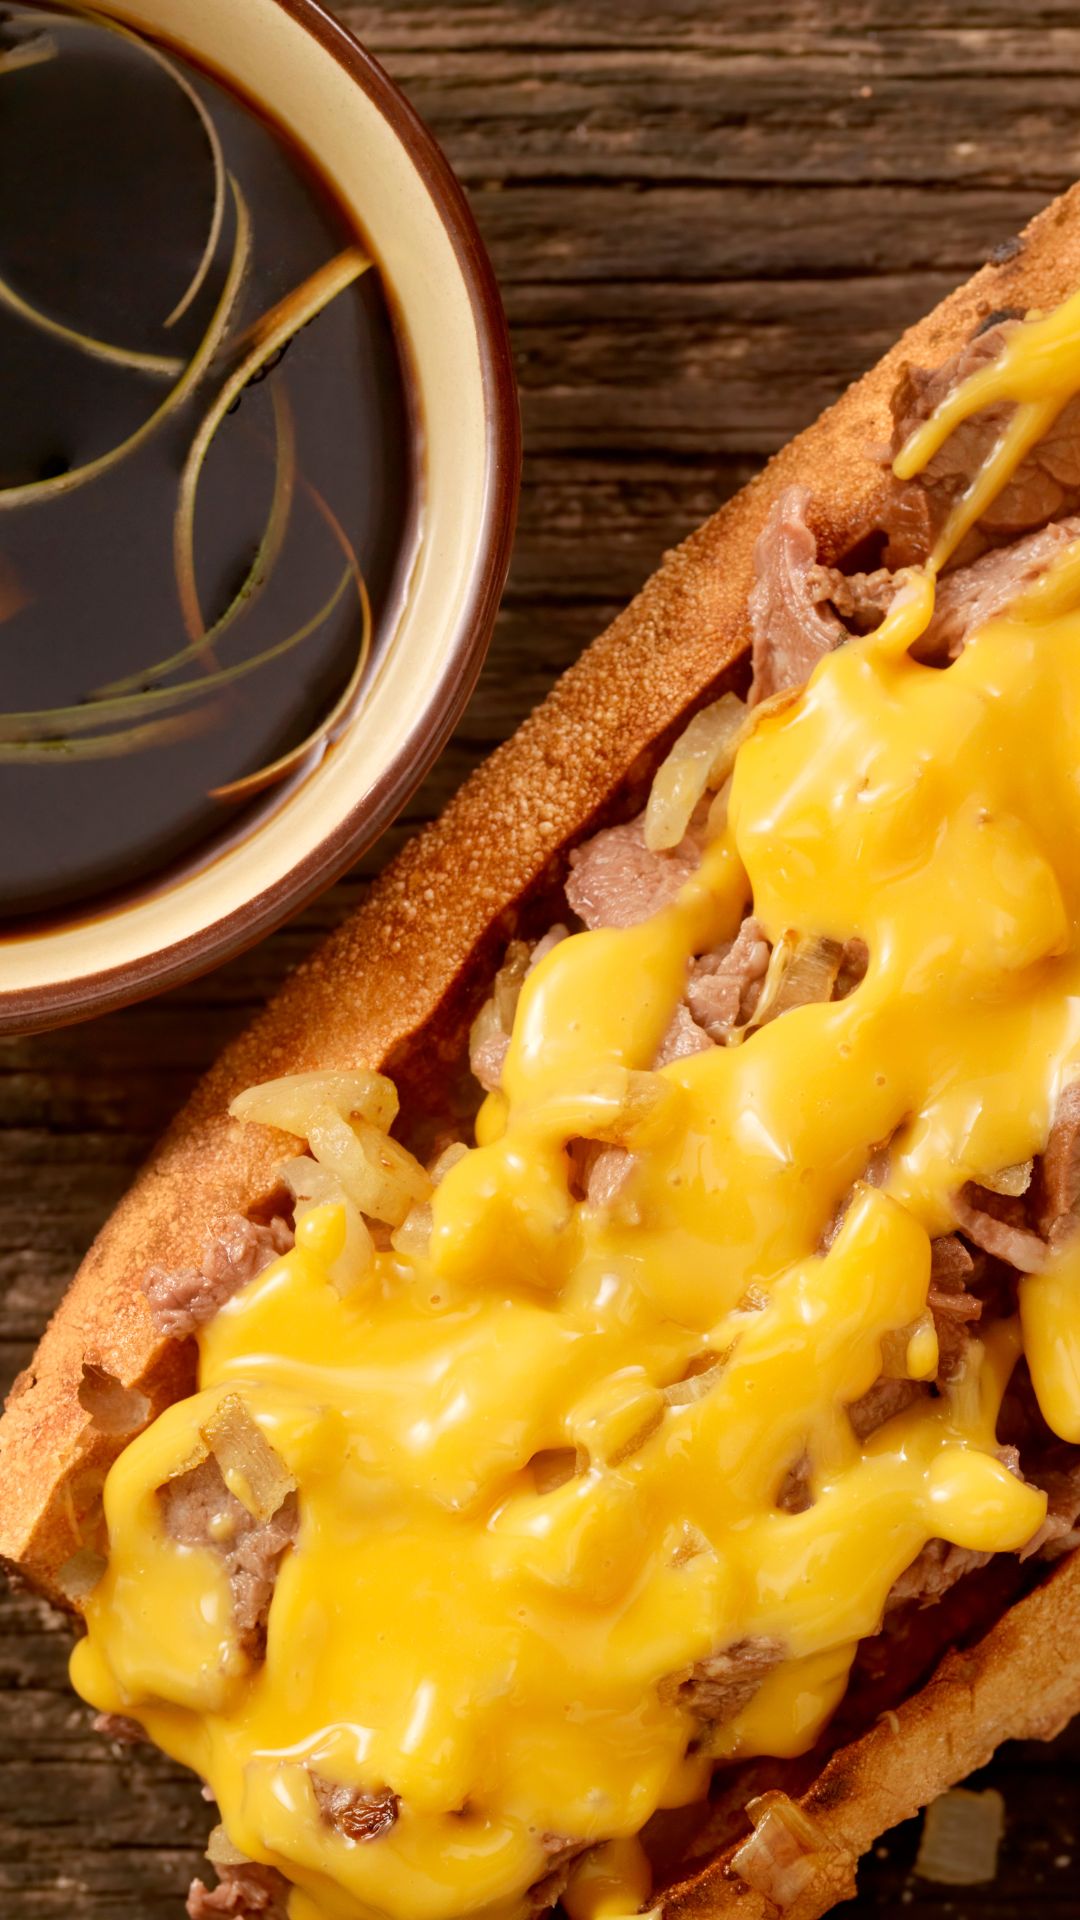 A prime rib sandwich on a toasted bun topped with melted cheese and served with au jus